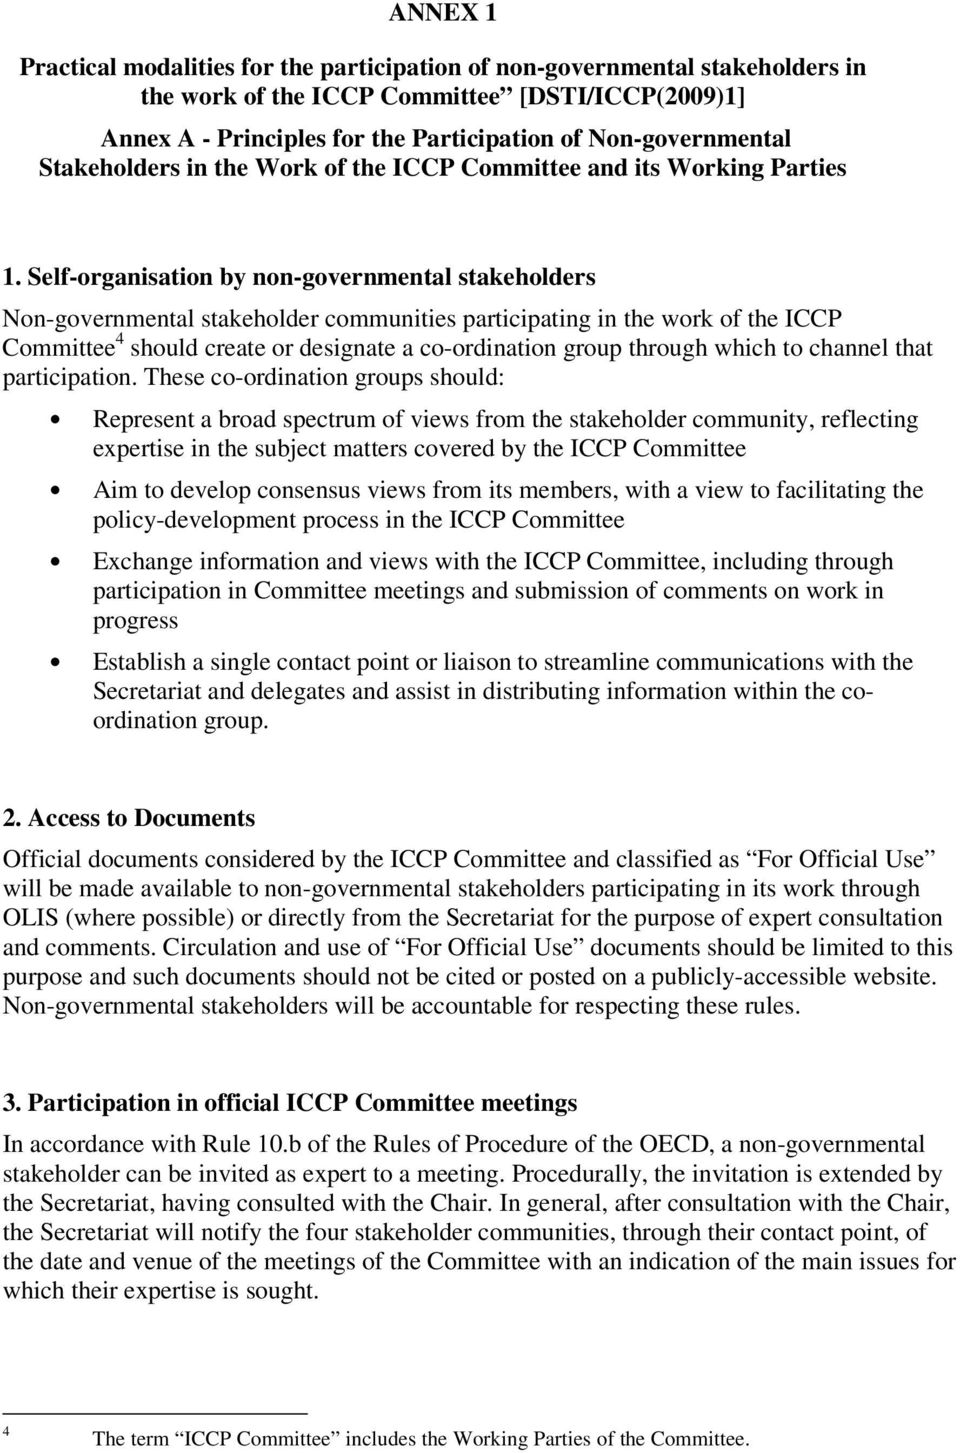 Self-organisation by non-governmental stakeholders Non-governmental stakeholder communities participating in the work of the ICCP Committee 4 should create or designate a co-ordination group through